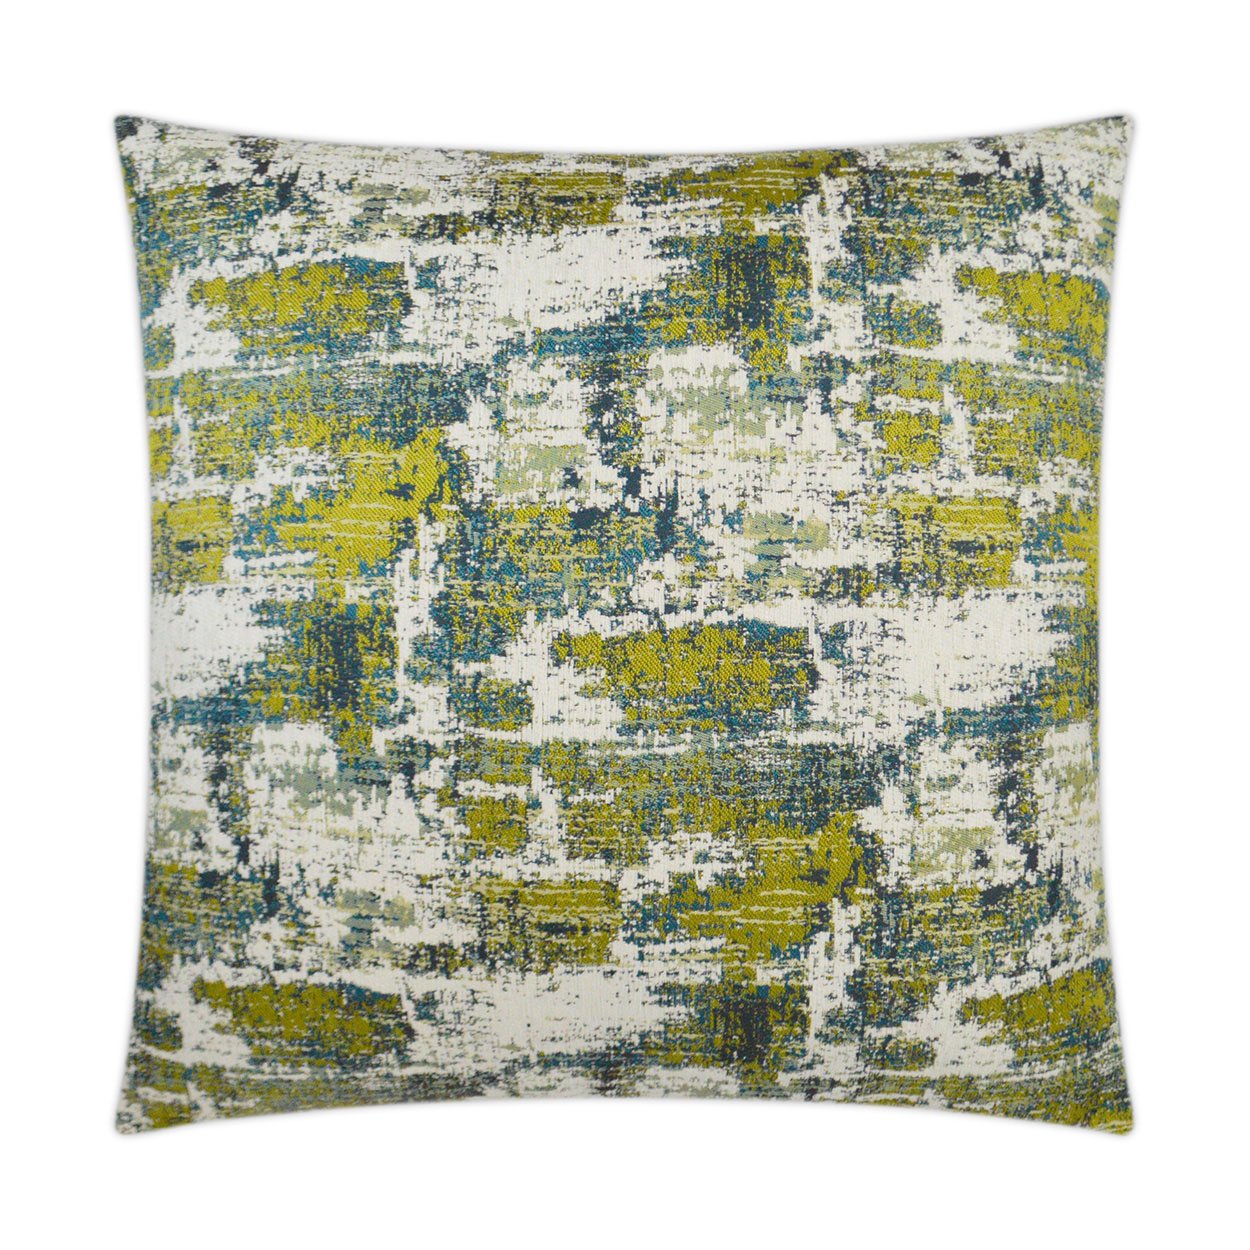 Luxury Pillow - 24" x 24" - Textural Amazon; Bright green, white and shimmering teal in an abstract pattern